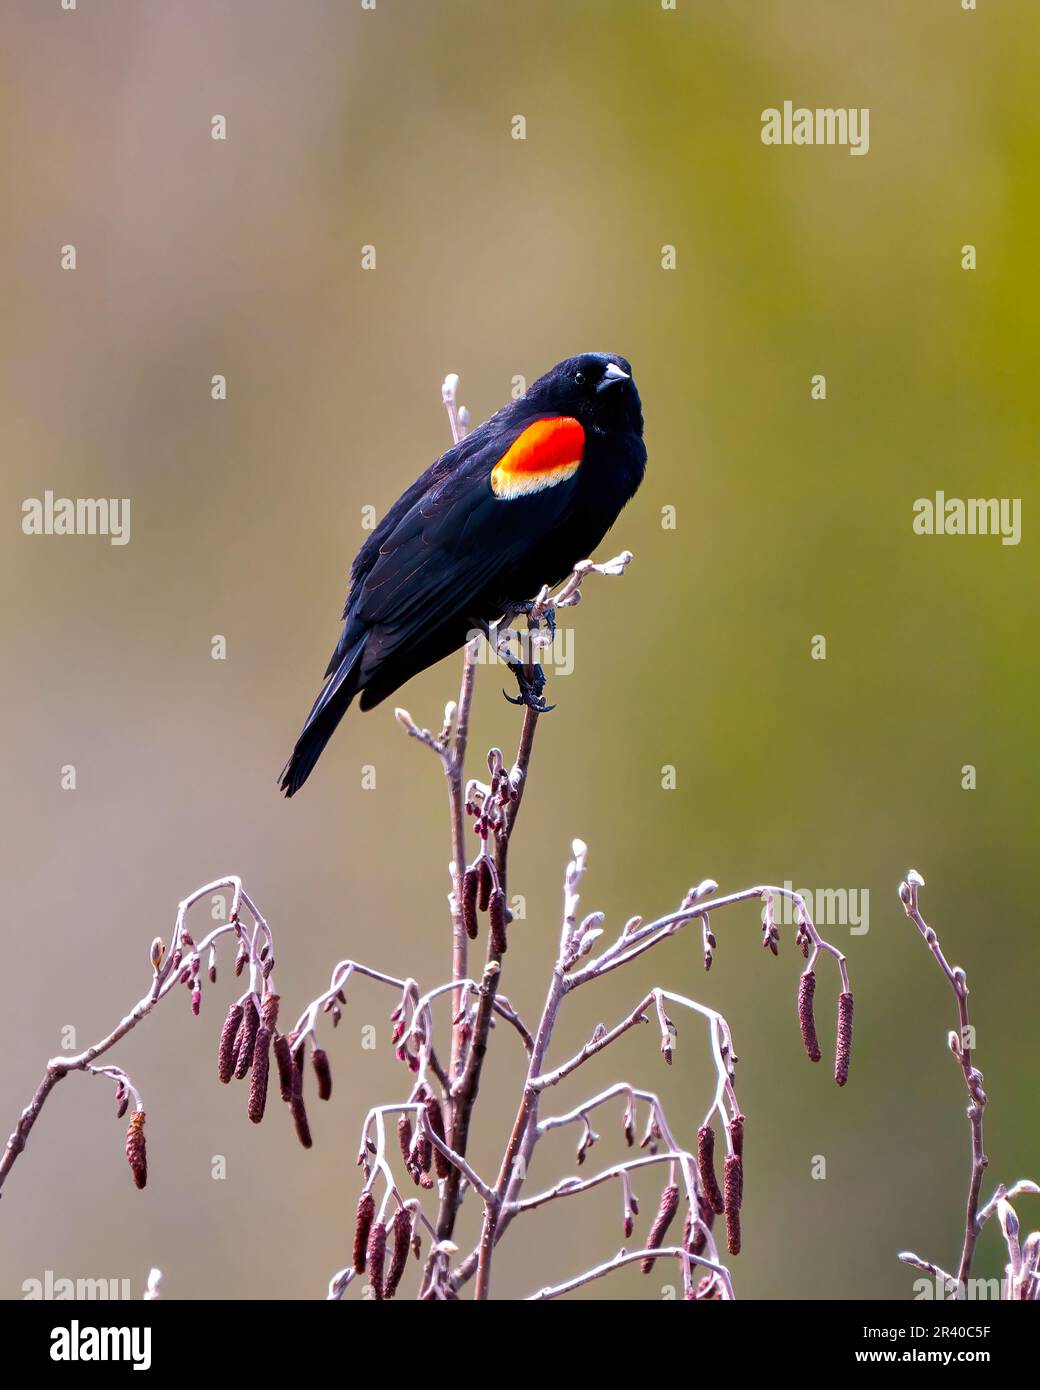 Red-Winged Blackbird close-up side view perched on bud leaf with a colourful background in its environment and habitat surrounding. Stock Photo